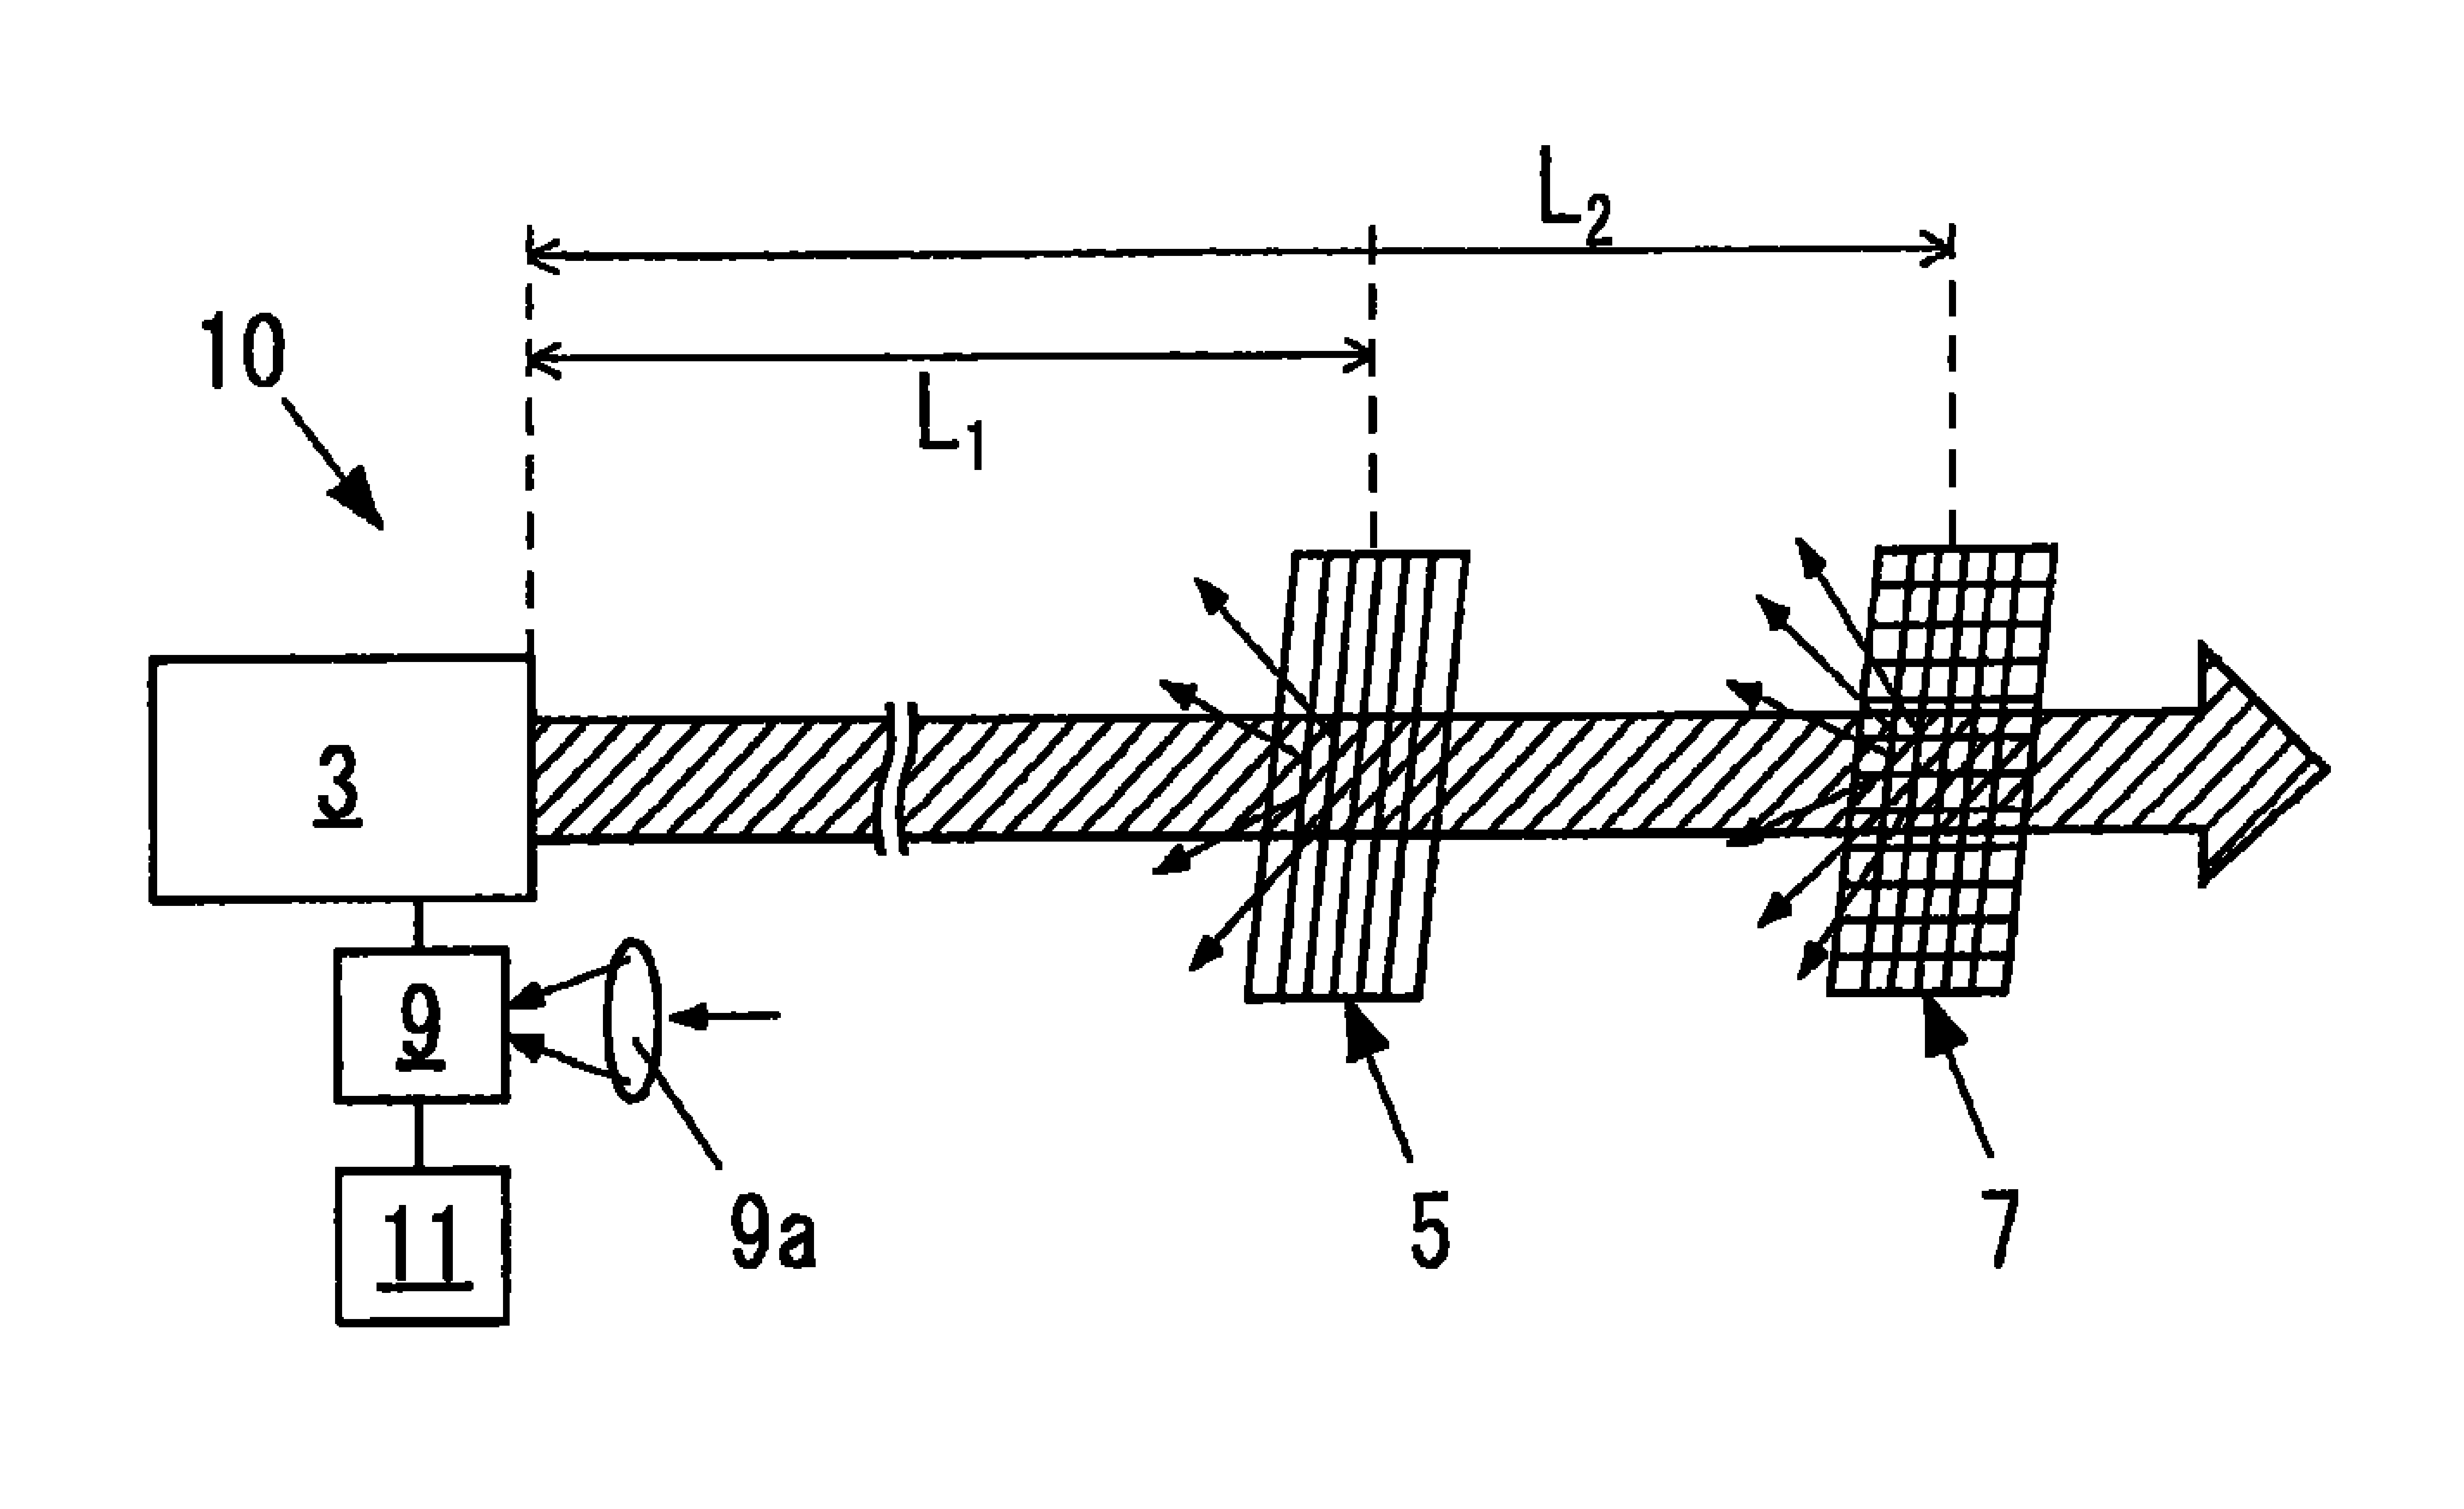 Apparatus for determining concentration of gaseous component